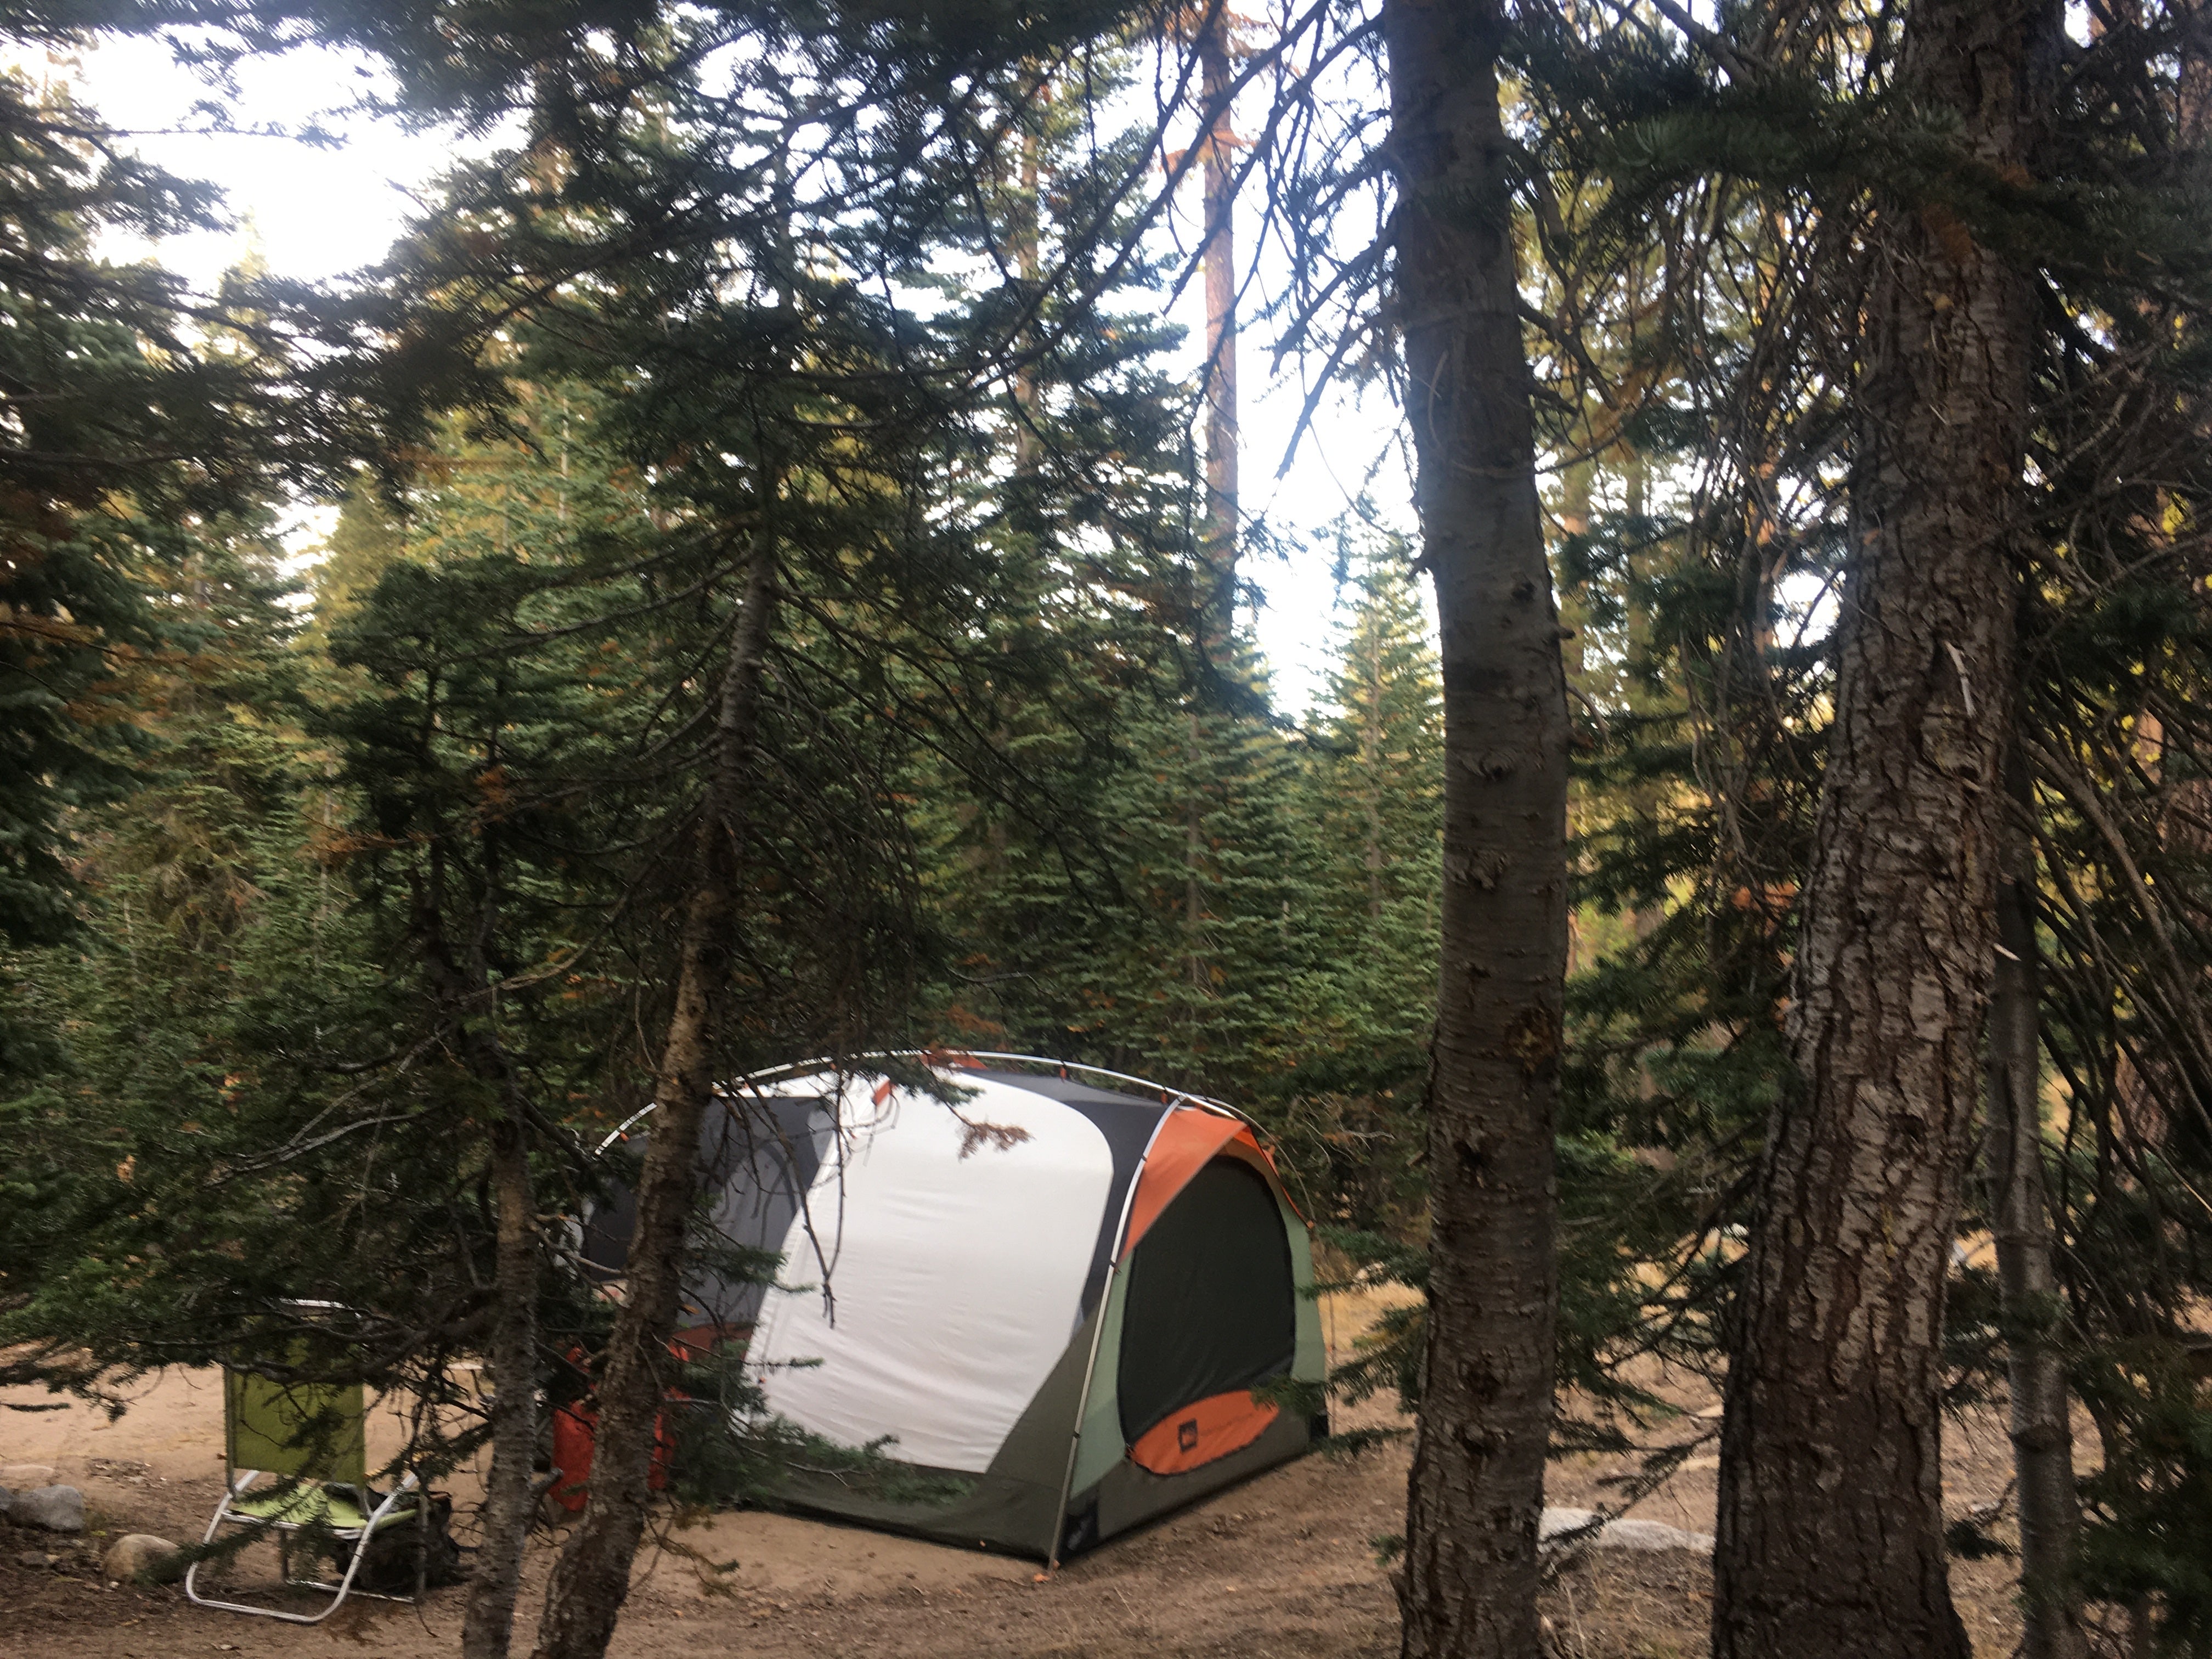 Camper submitted image from Pine Marten Campground - 5